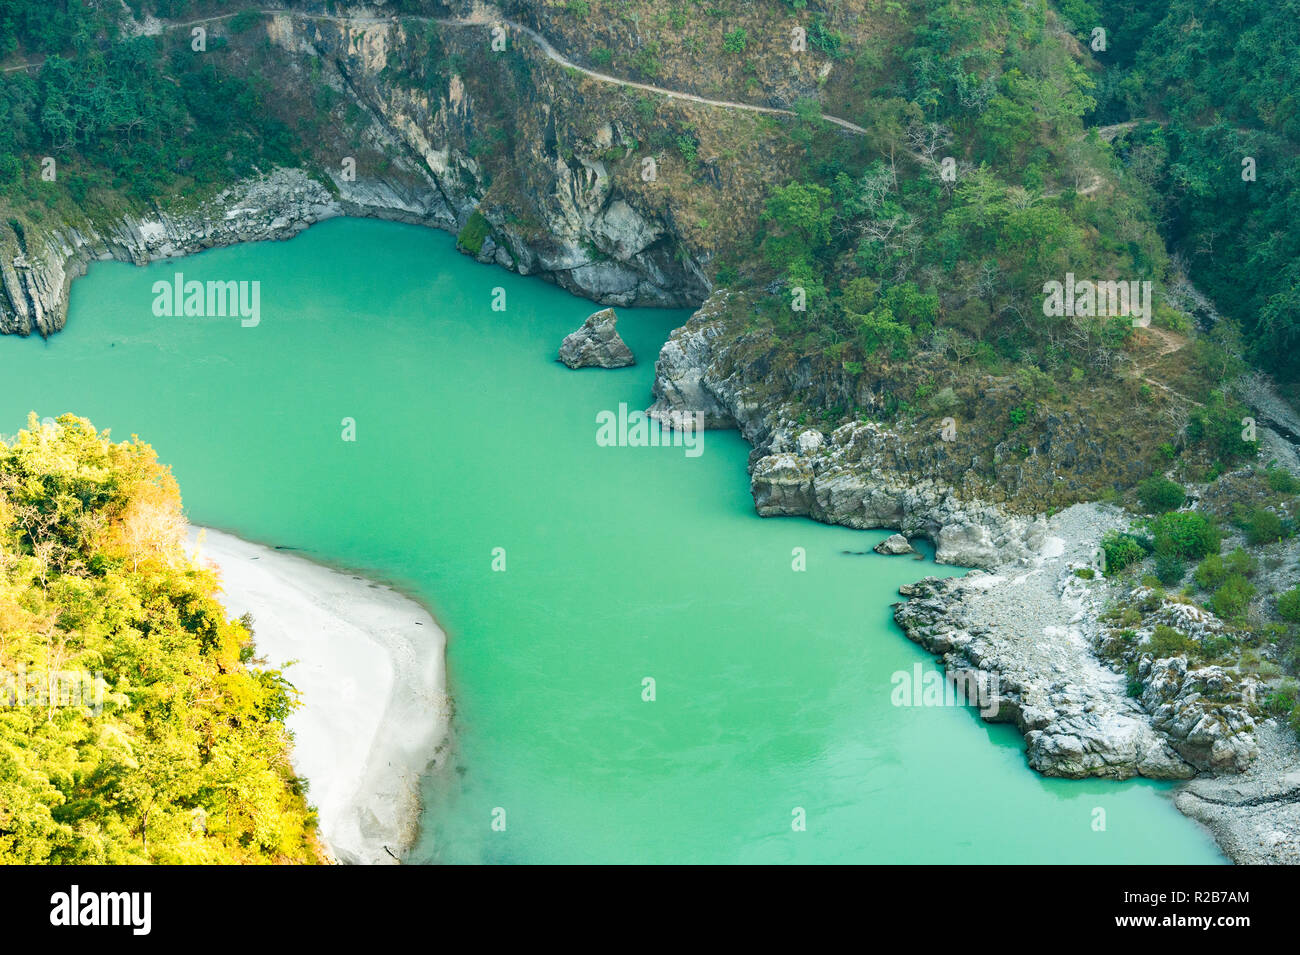 Spectacular view of the sacred Ganges river flowing through the green mountains of Rishikesh, Uttarakhand, India. Stock Photo